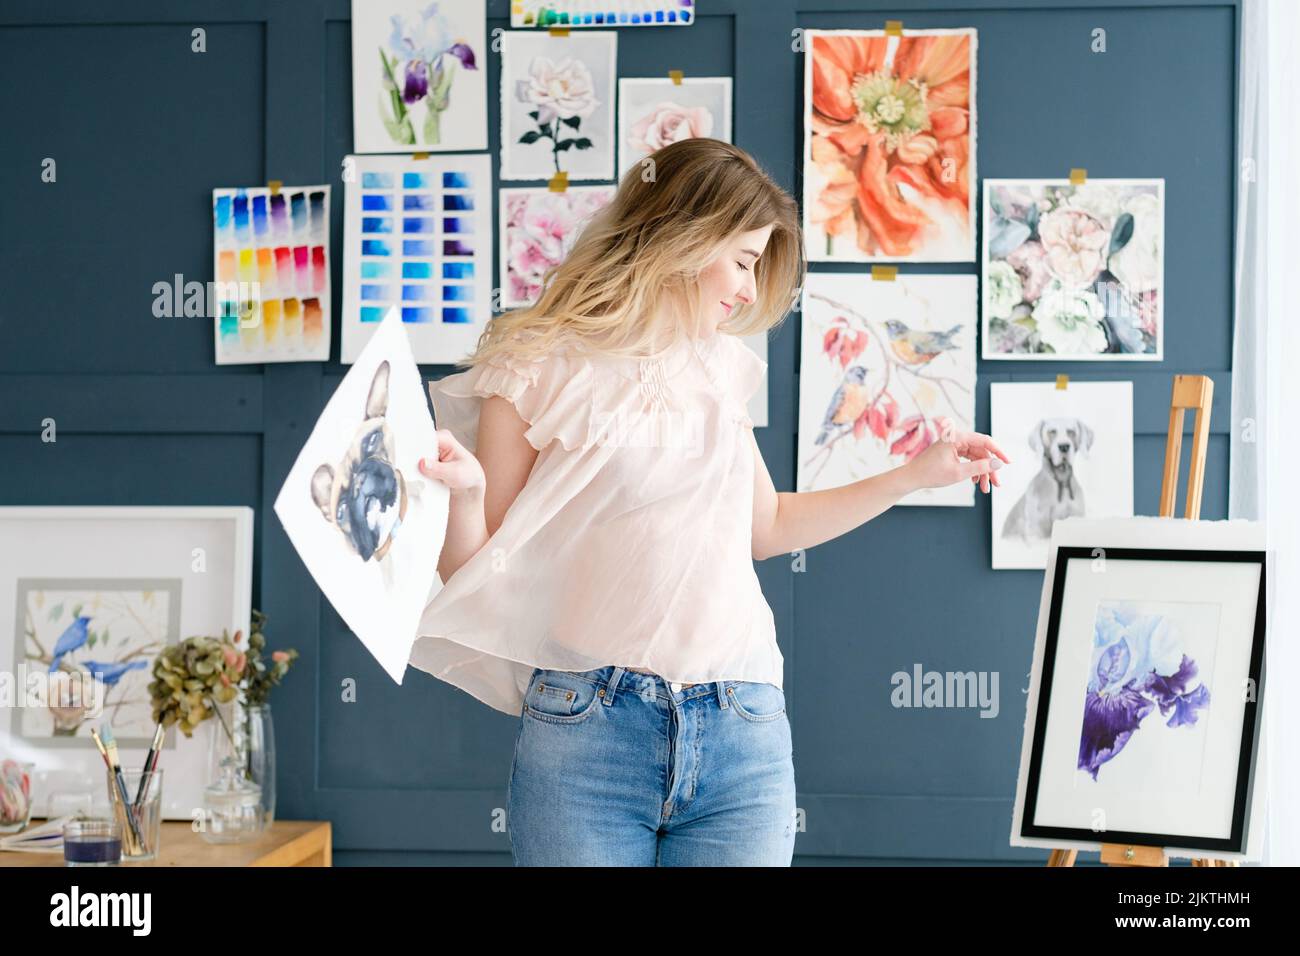 art inspiration expression drawing painting Stock Photo